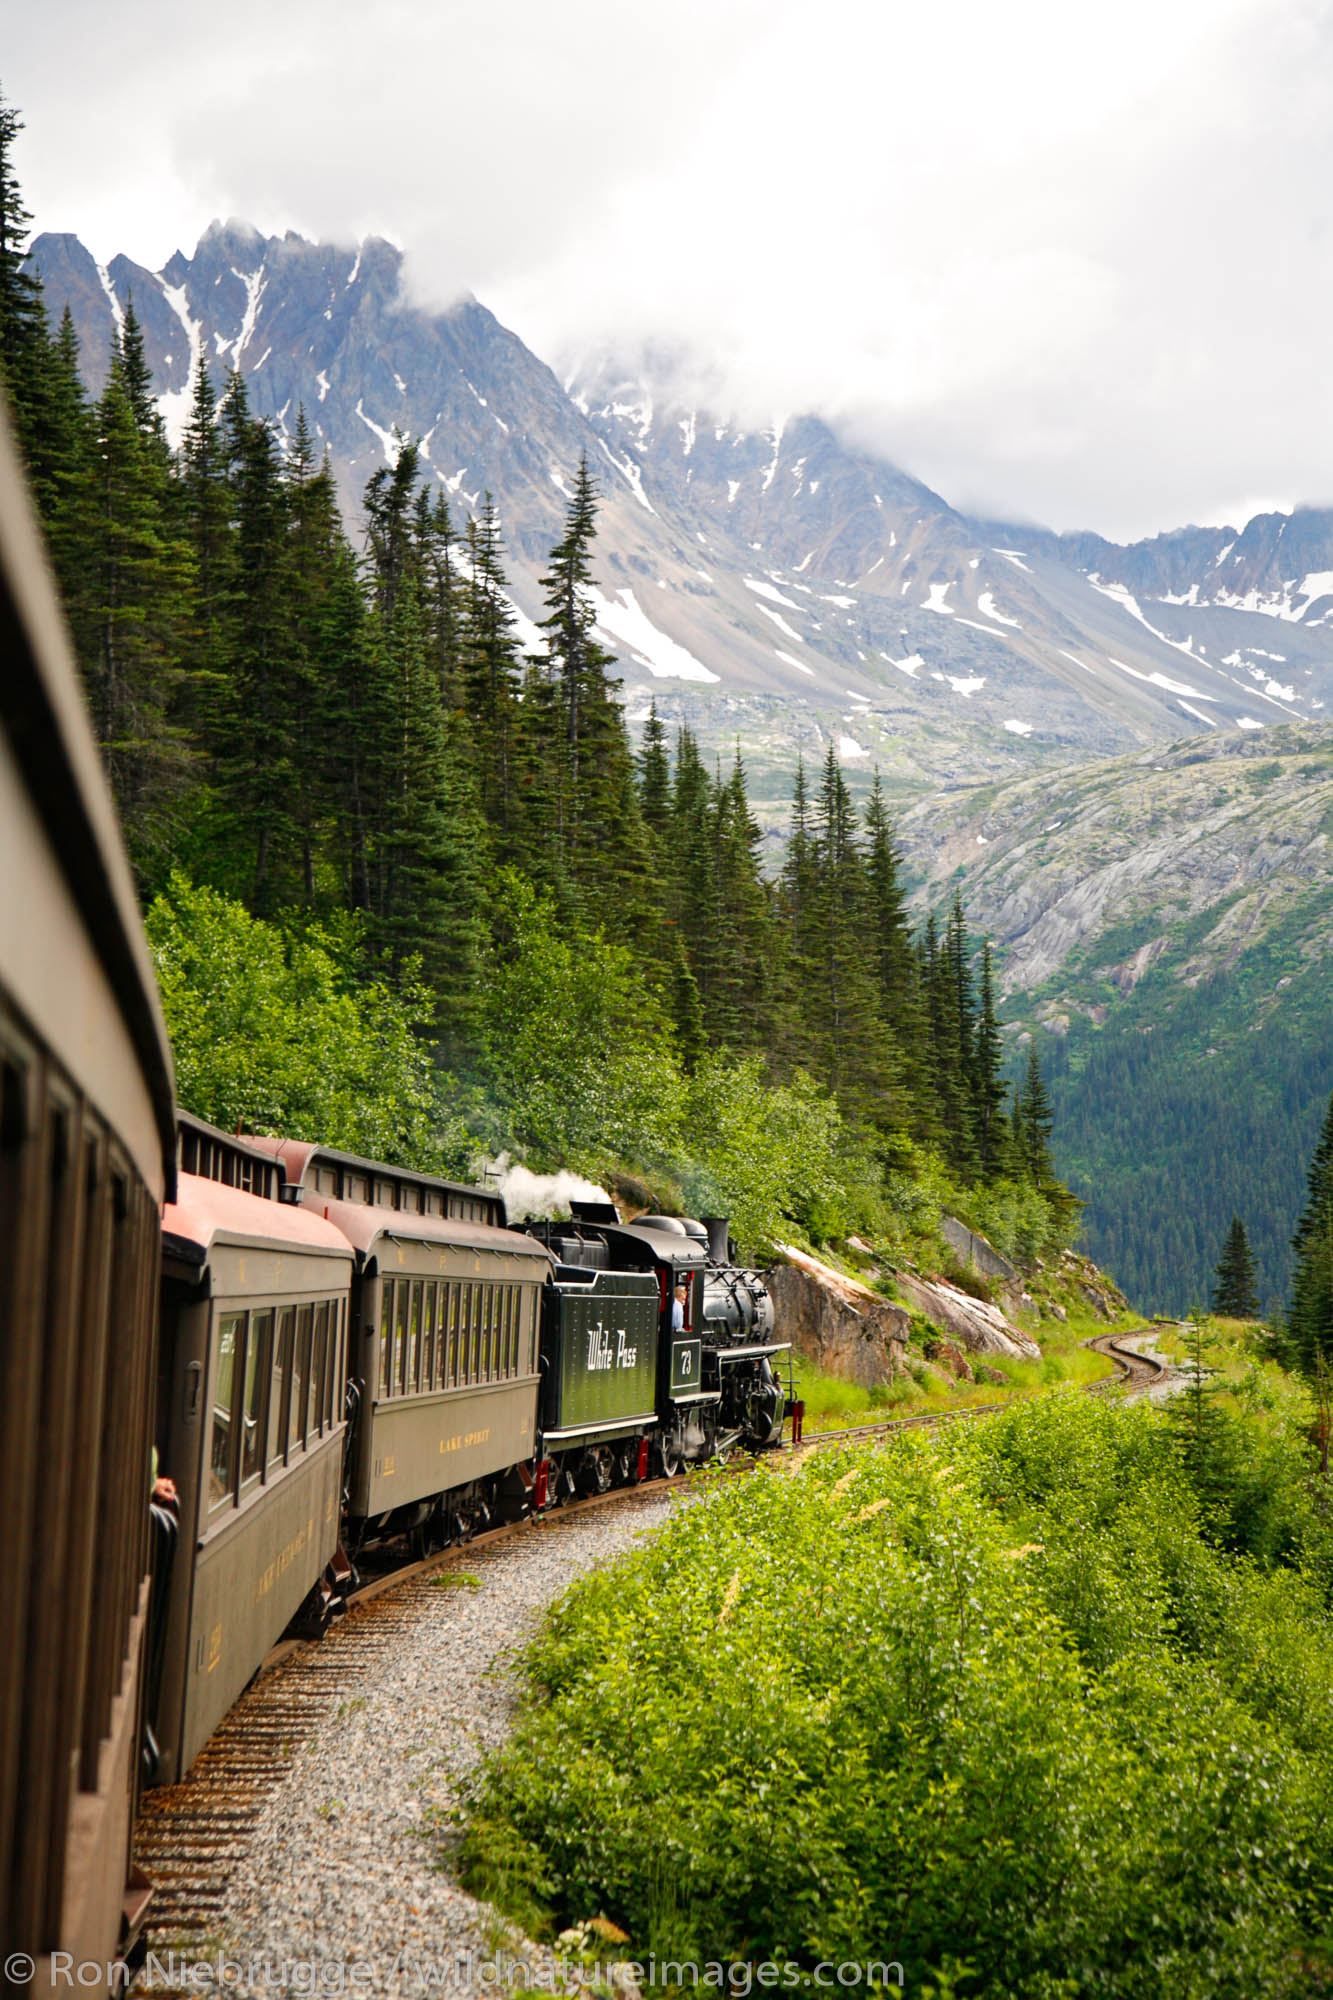 Aboard the White Pass Yukon Route Railroad from Skagway, Alaska on historic steam engine 73..